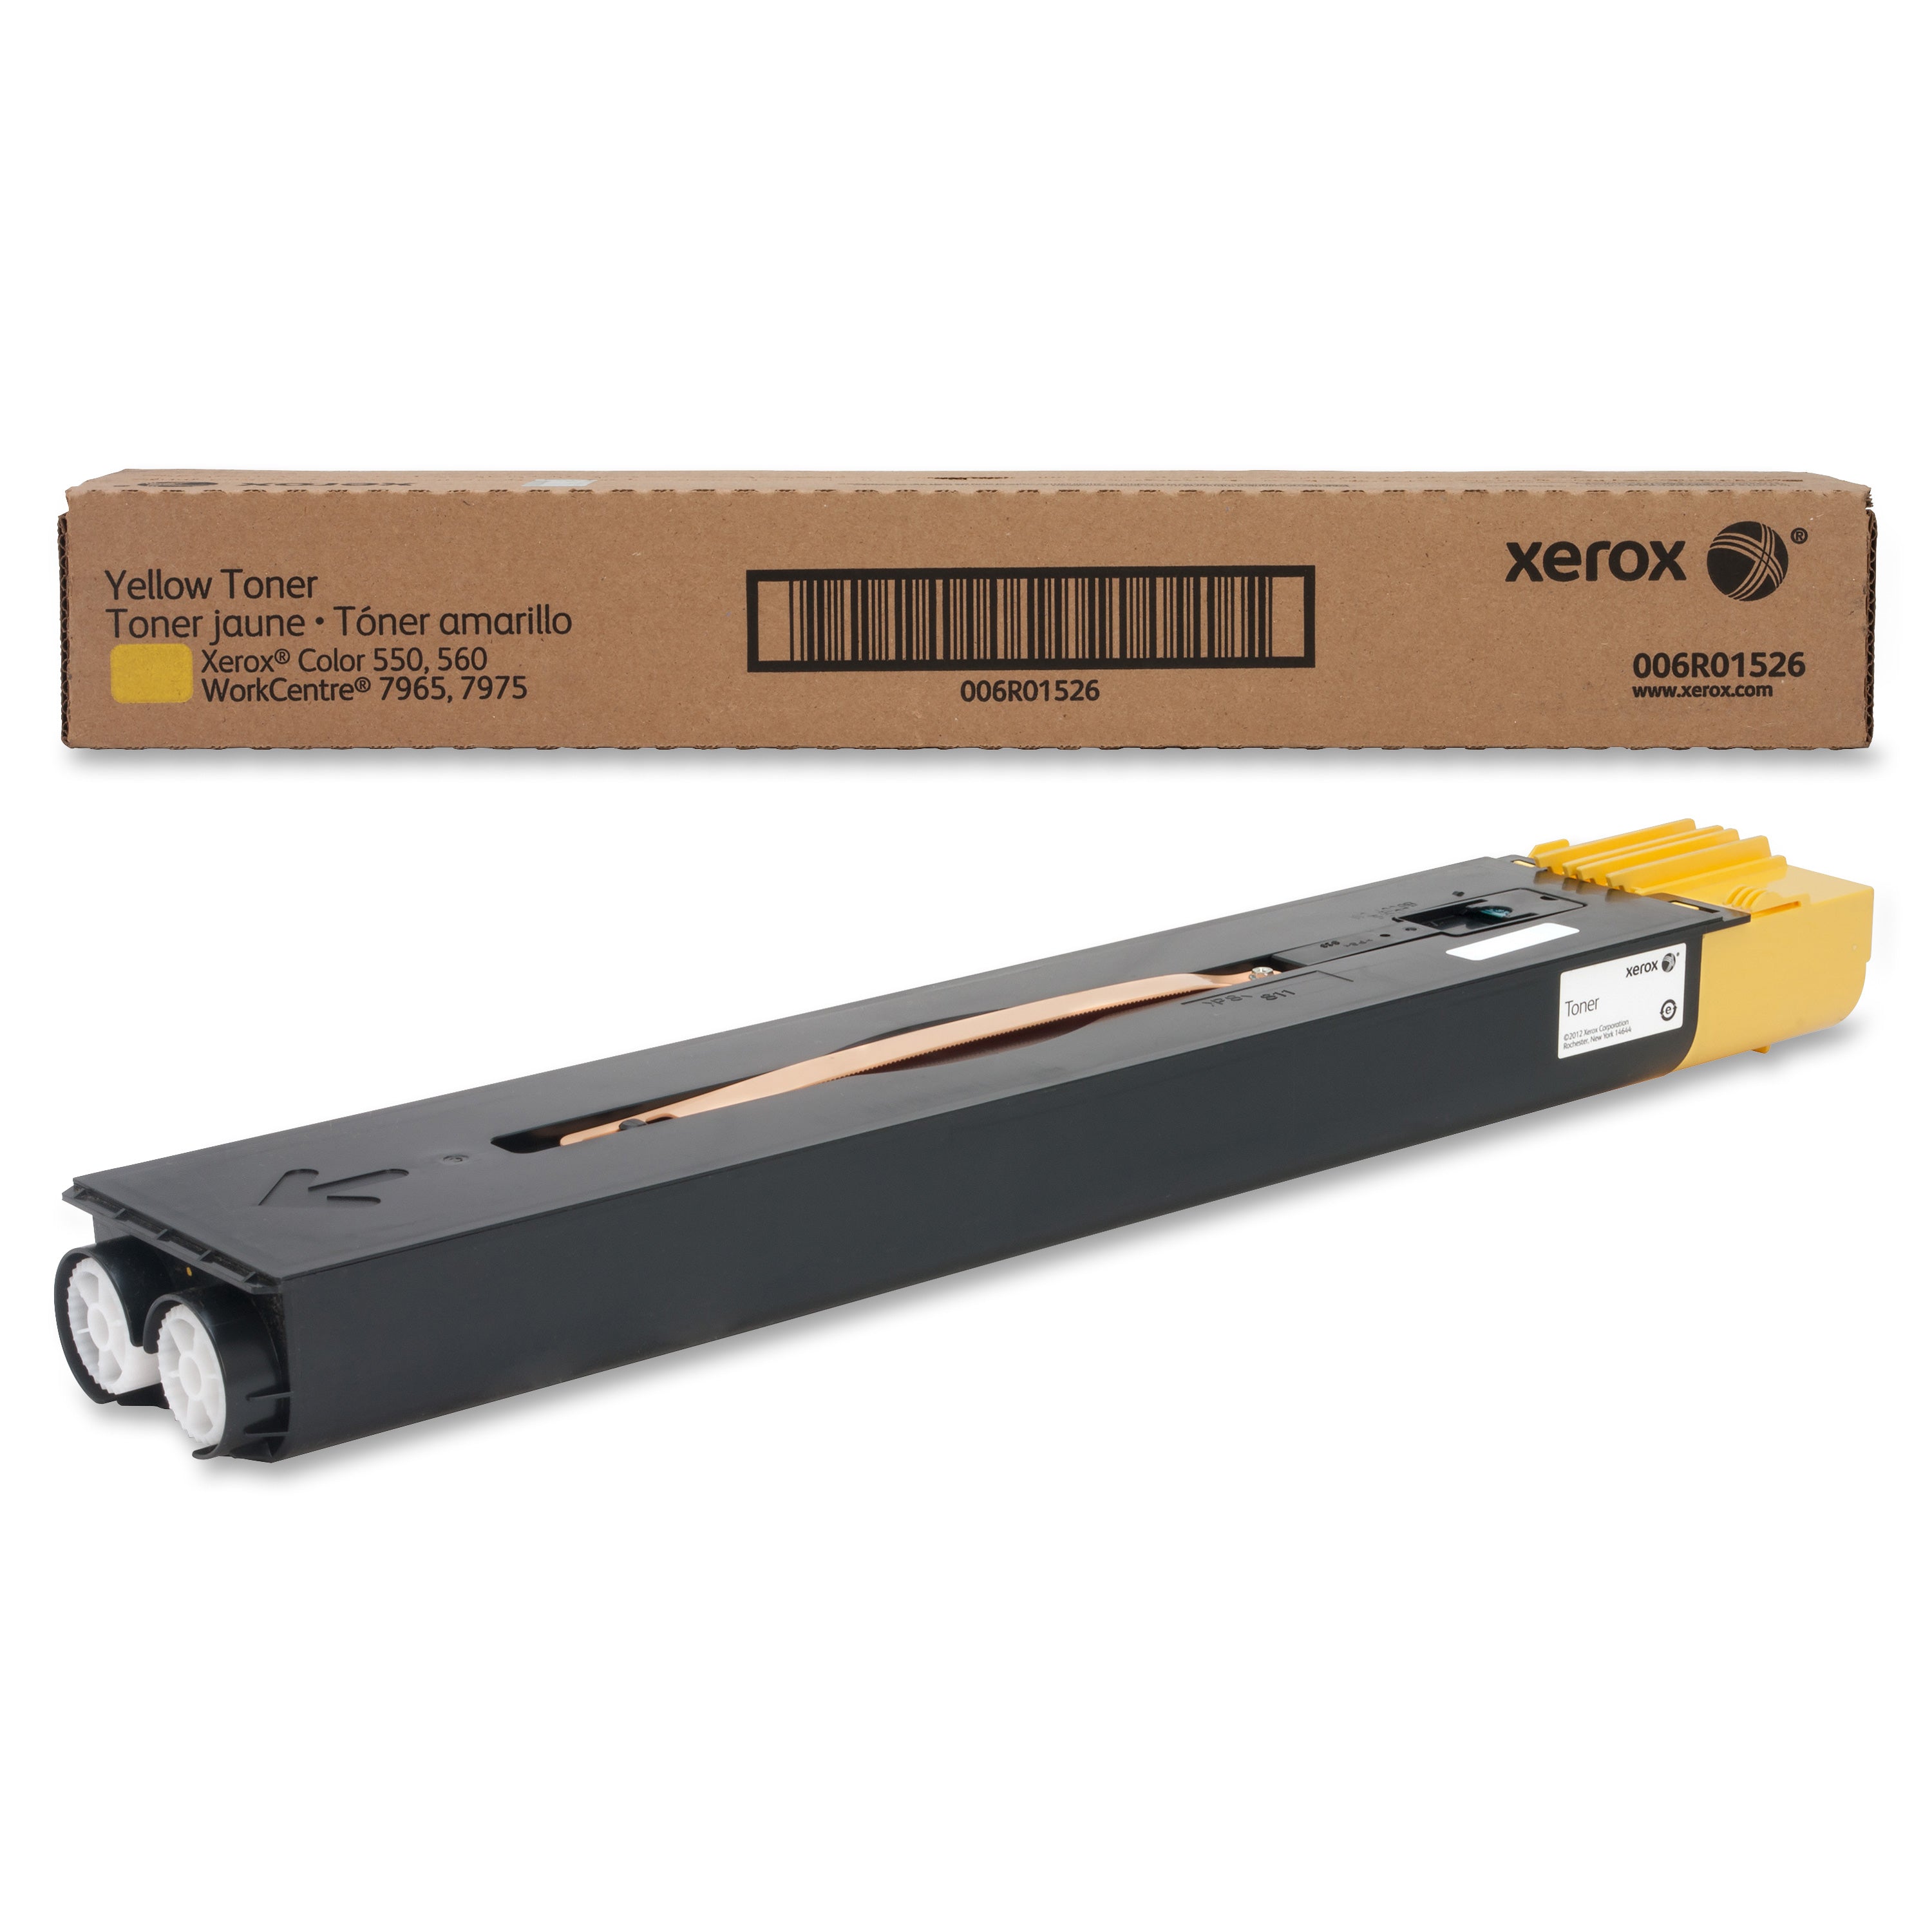 Xerox Yellow Toner Cartridge (32,000 Pages) 006R01526 for Color 550/560/570-Scriptum Supplies